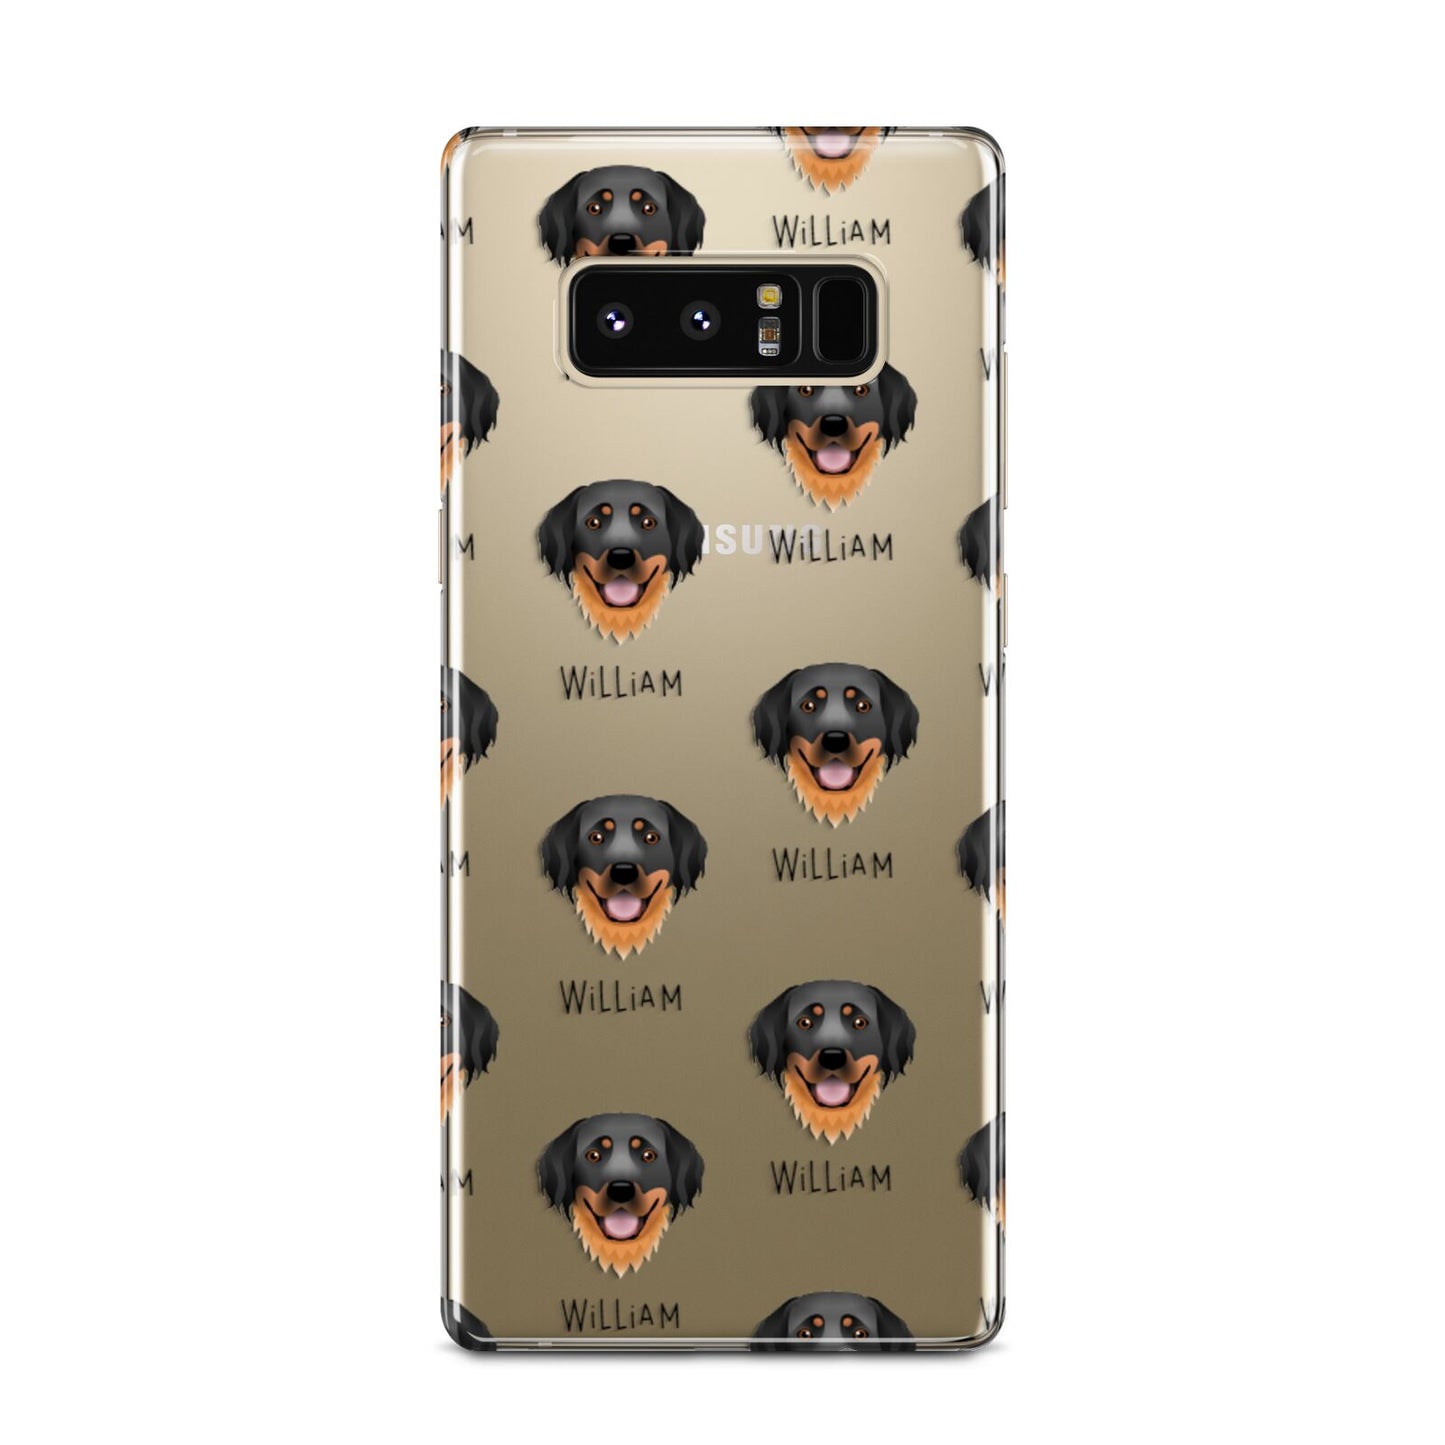 Hovawart Icon with Name Samsung Galaxy Note 8 Case